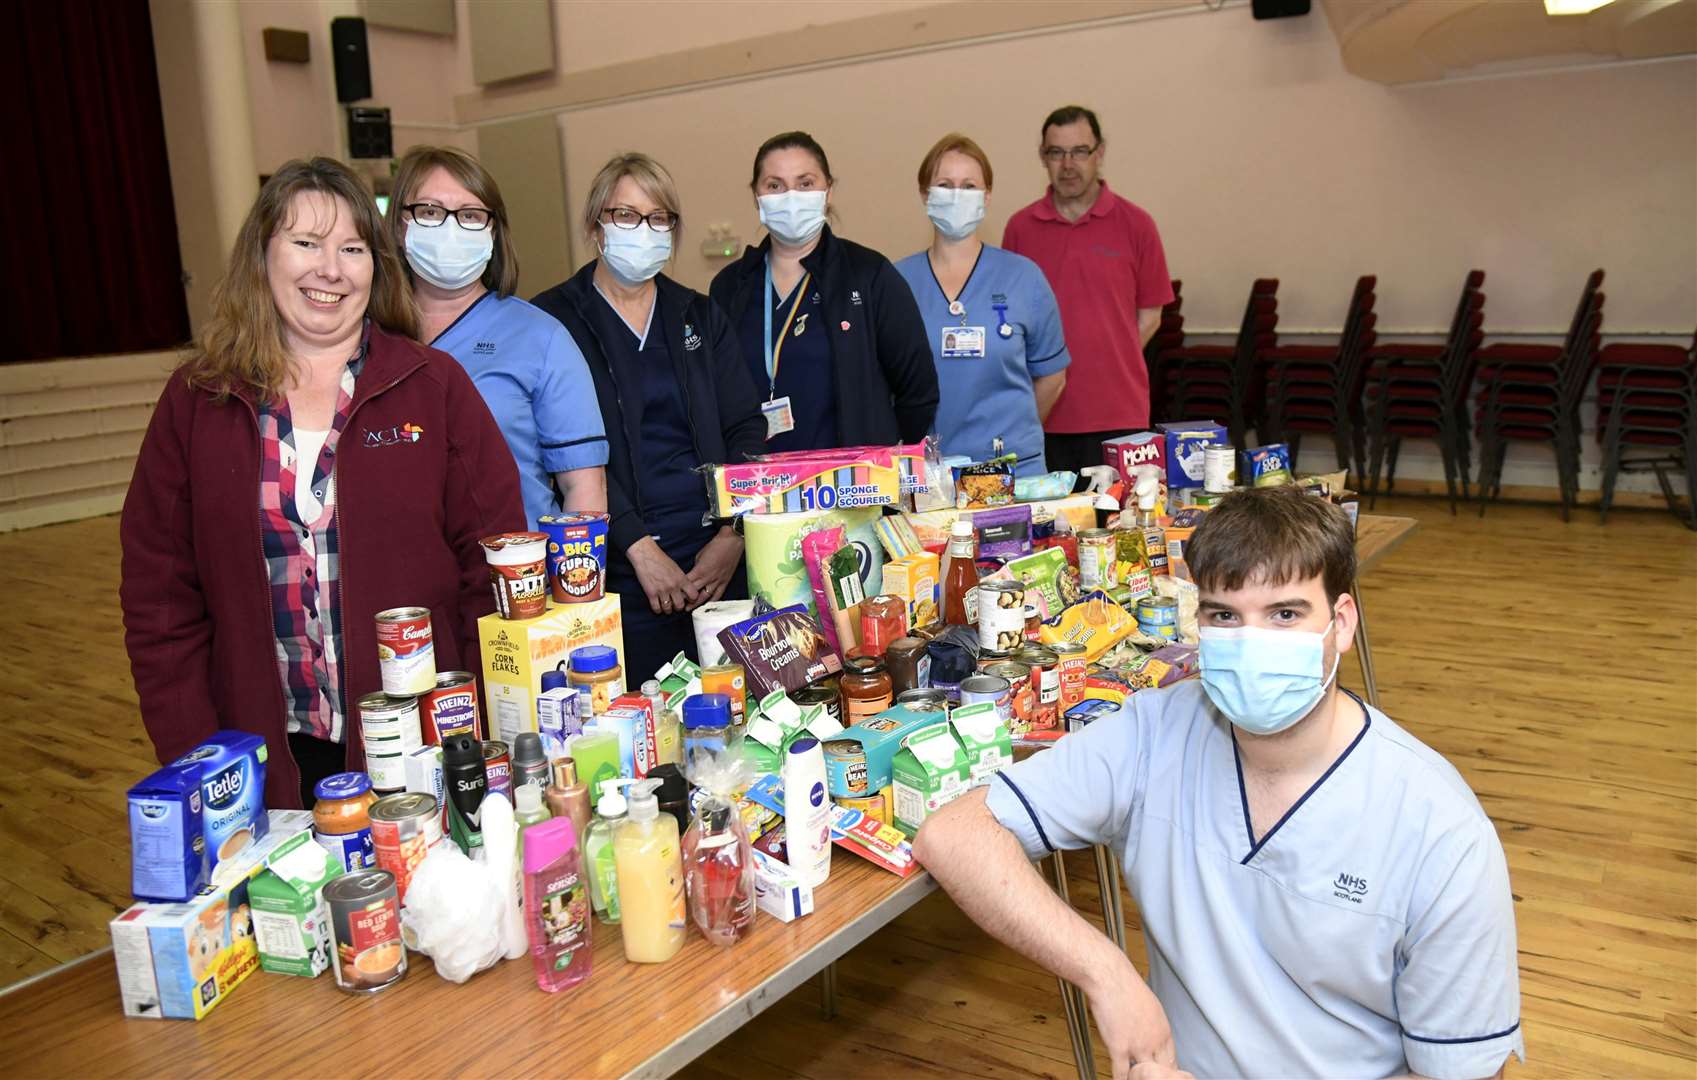 Staff at Forres Health Centre donate food to Forres Area Community Trusts Larder on International Nurses Day...From left are Lindsey Standring (FACT), Tracey Cooper, Fiona Adams, Danielle Mcleod, Lesley-Anne Exon, Graham Watson (FACT) and James Hynam (front)...Picture: Becky Saunderson..